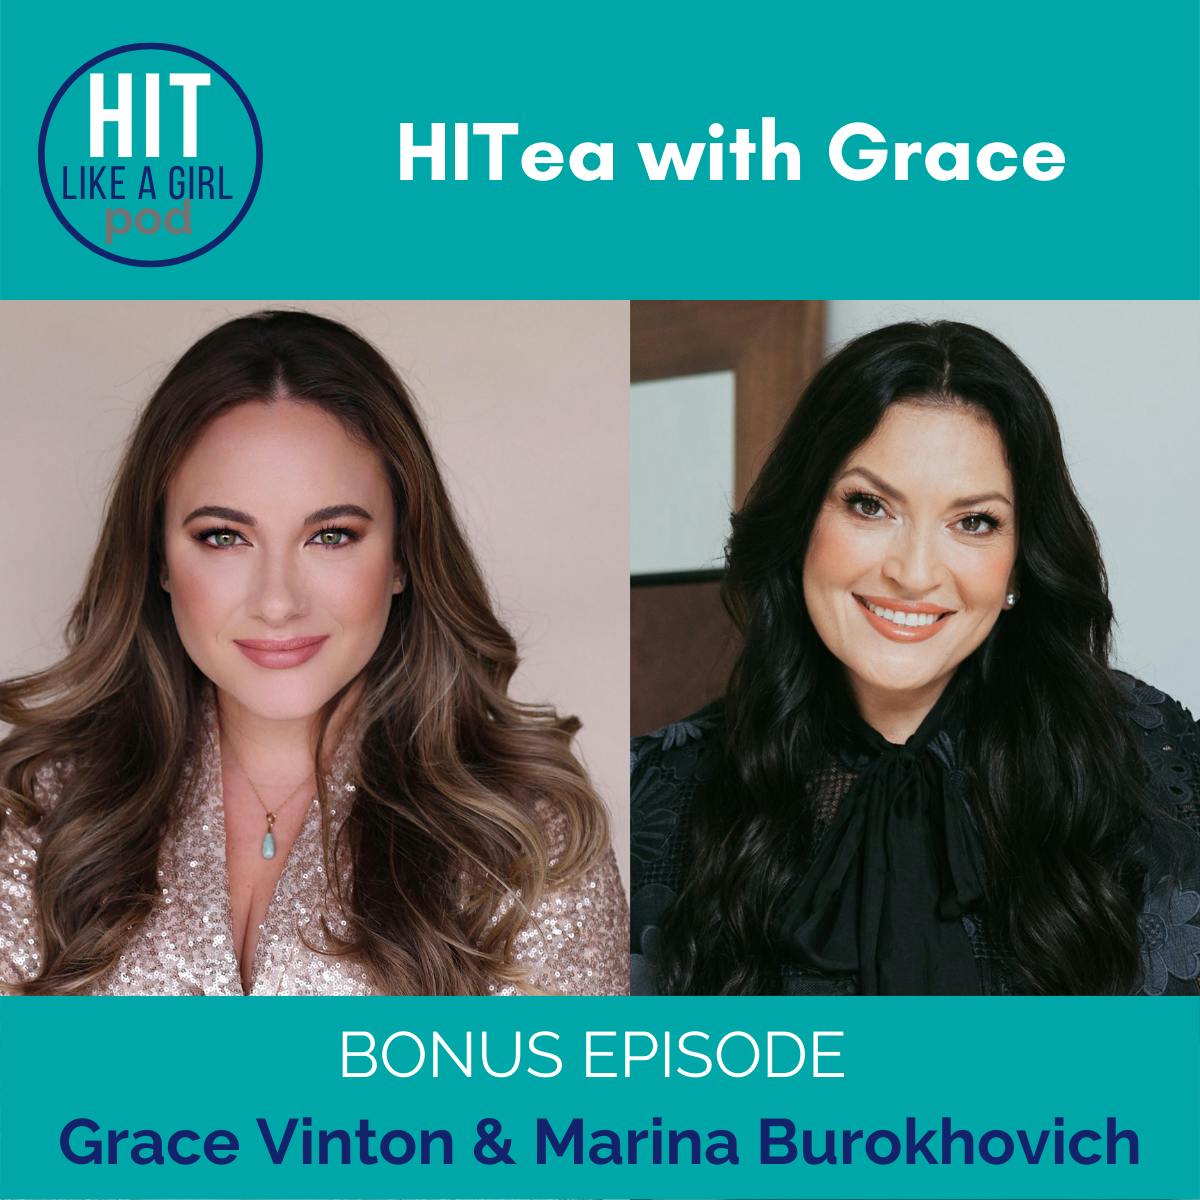 HITea with Grace: Marina Borukhovich on How Health Coaches are Agents of Change